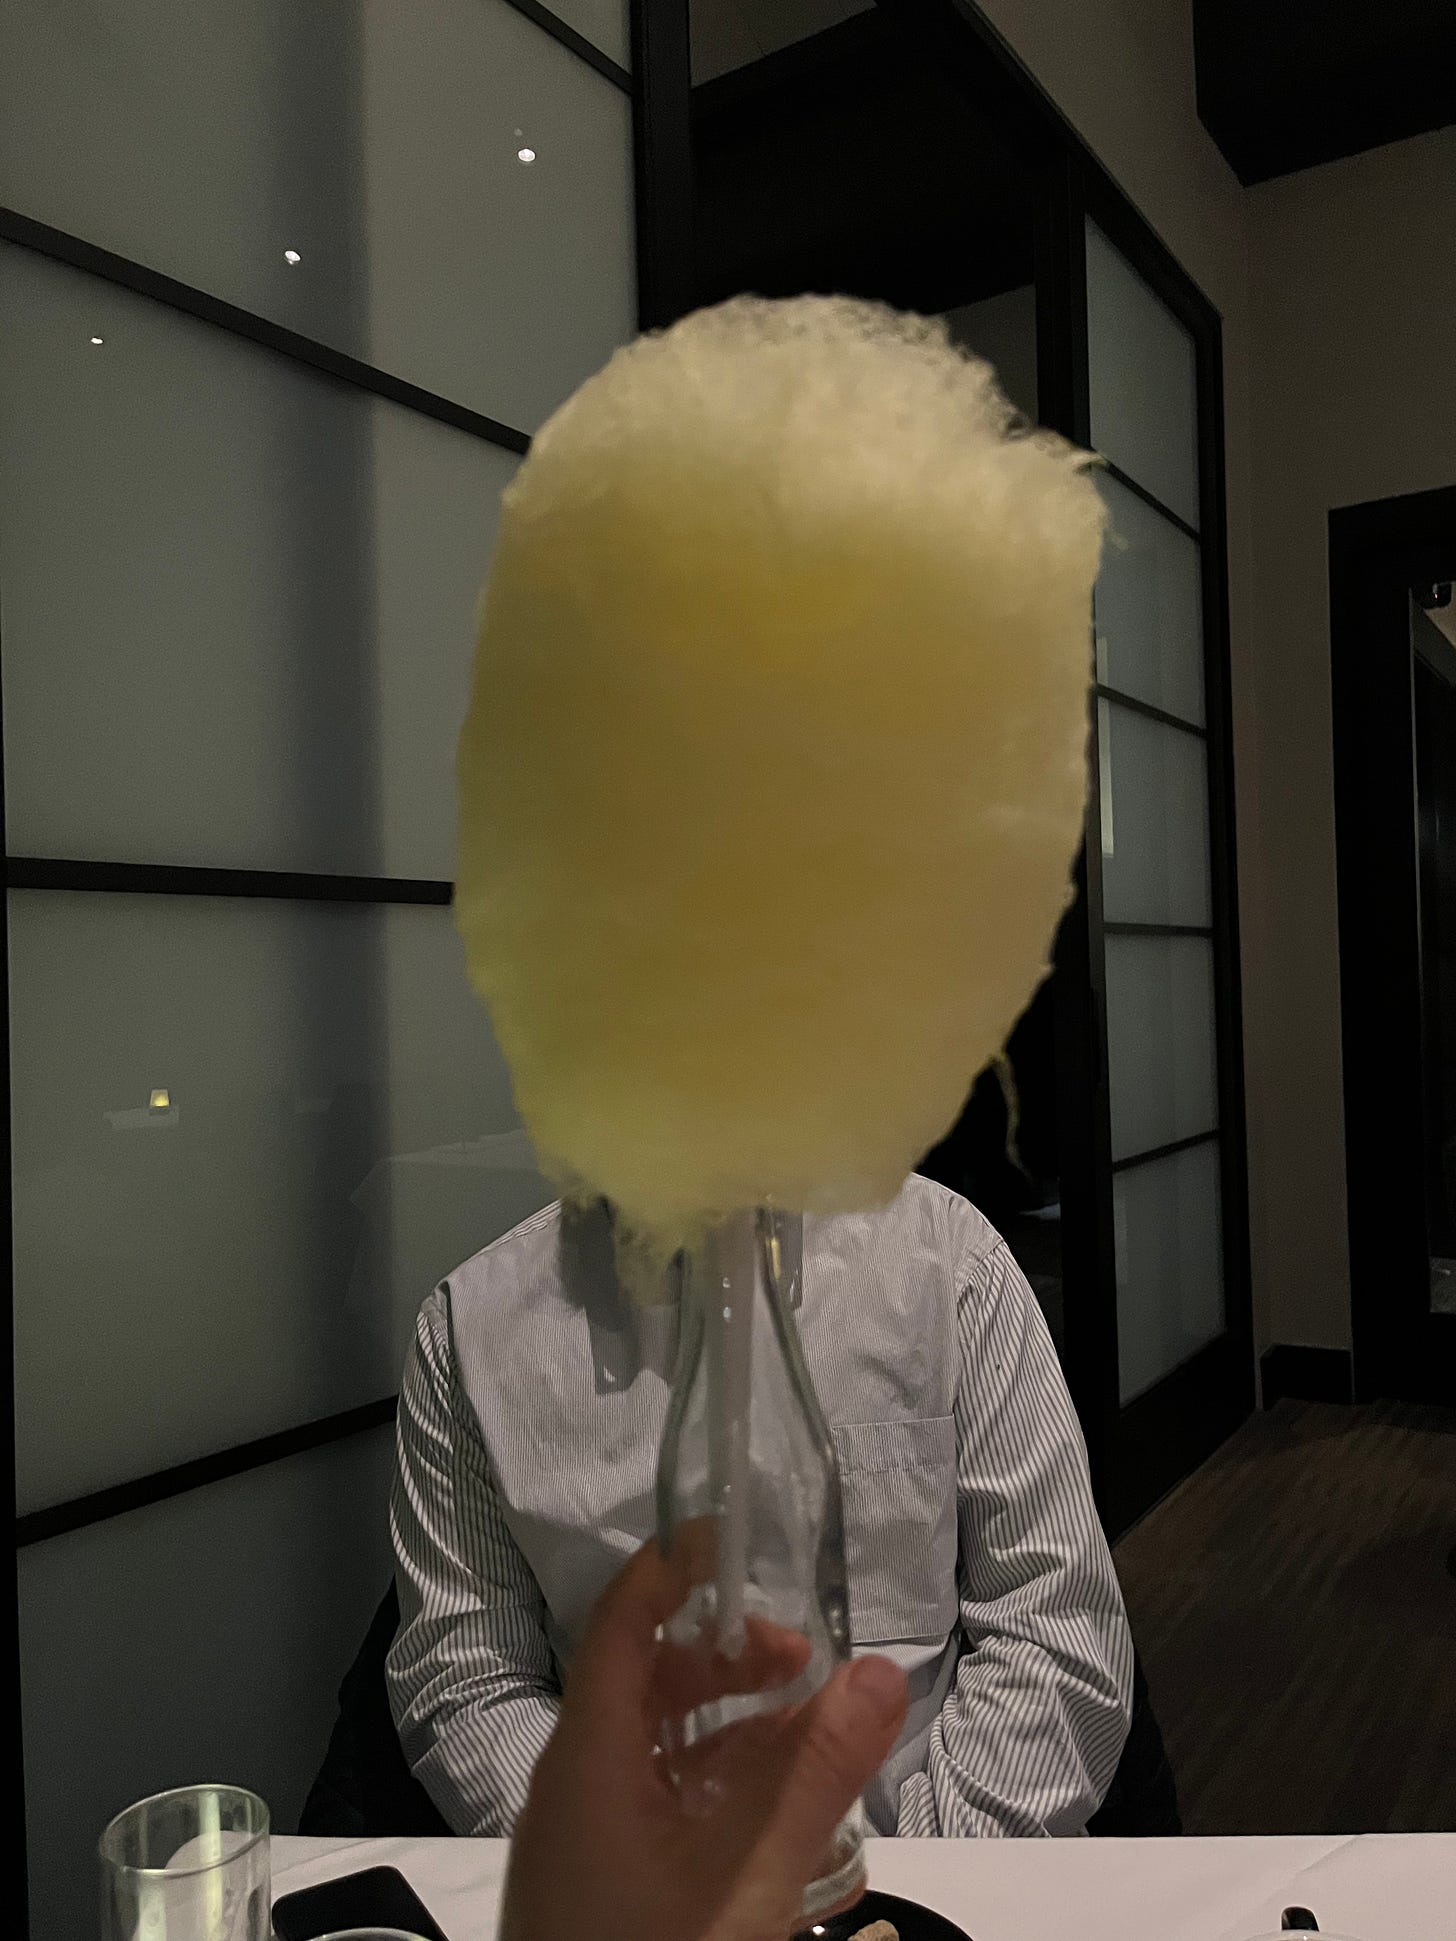 A yellow cotton candy obscuring a man's face.